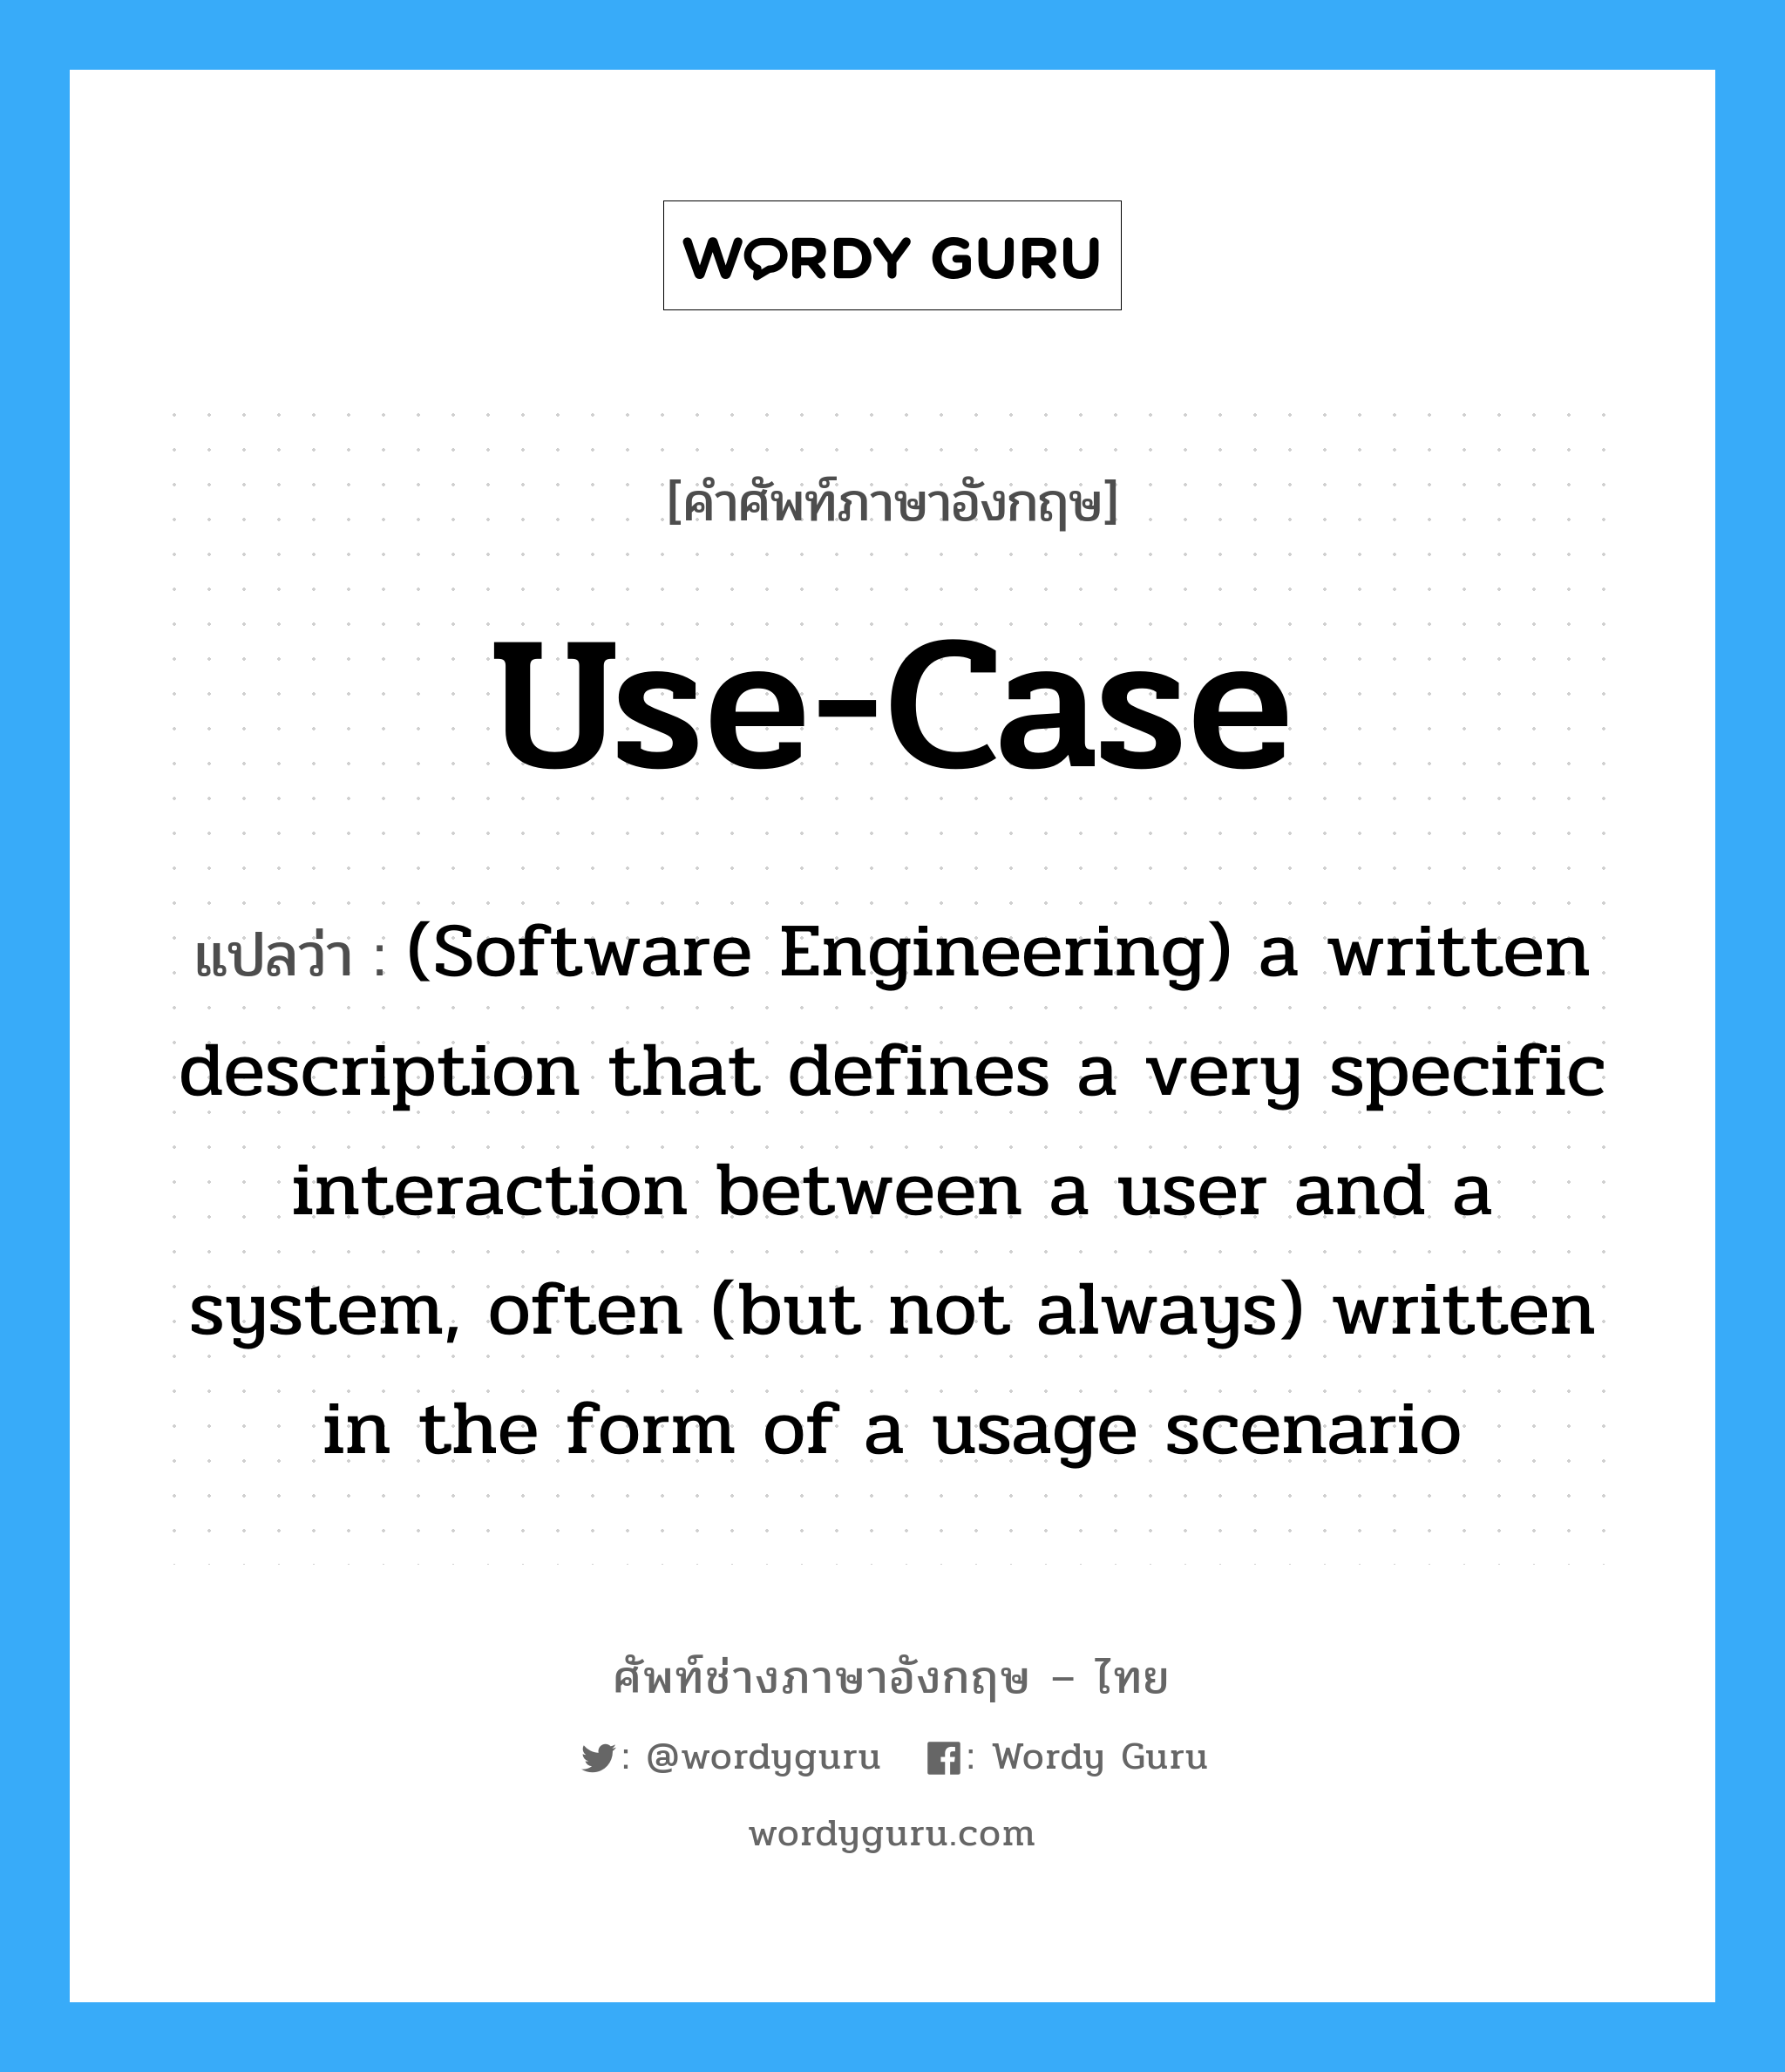 Use-case แปลว่า?, คำศัพท์ช่างภาษาอังกฤษ - ไทย Use-case คำศัพท์ภาษาอังกฤษ Use-case แปลว่า (Software Engineering) a written description that defines a very specific interaction between a user and a system, often (but not always) written in the form of a usage scenario